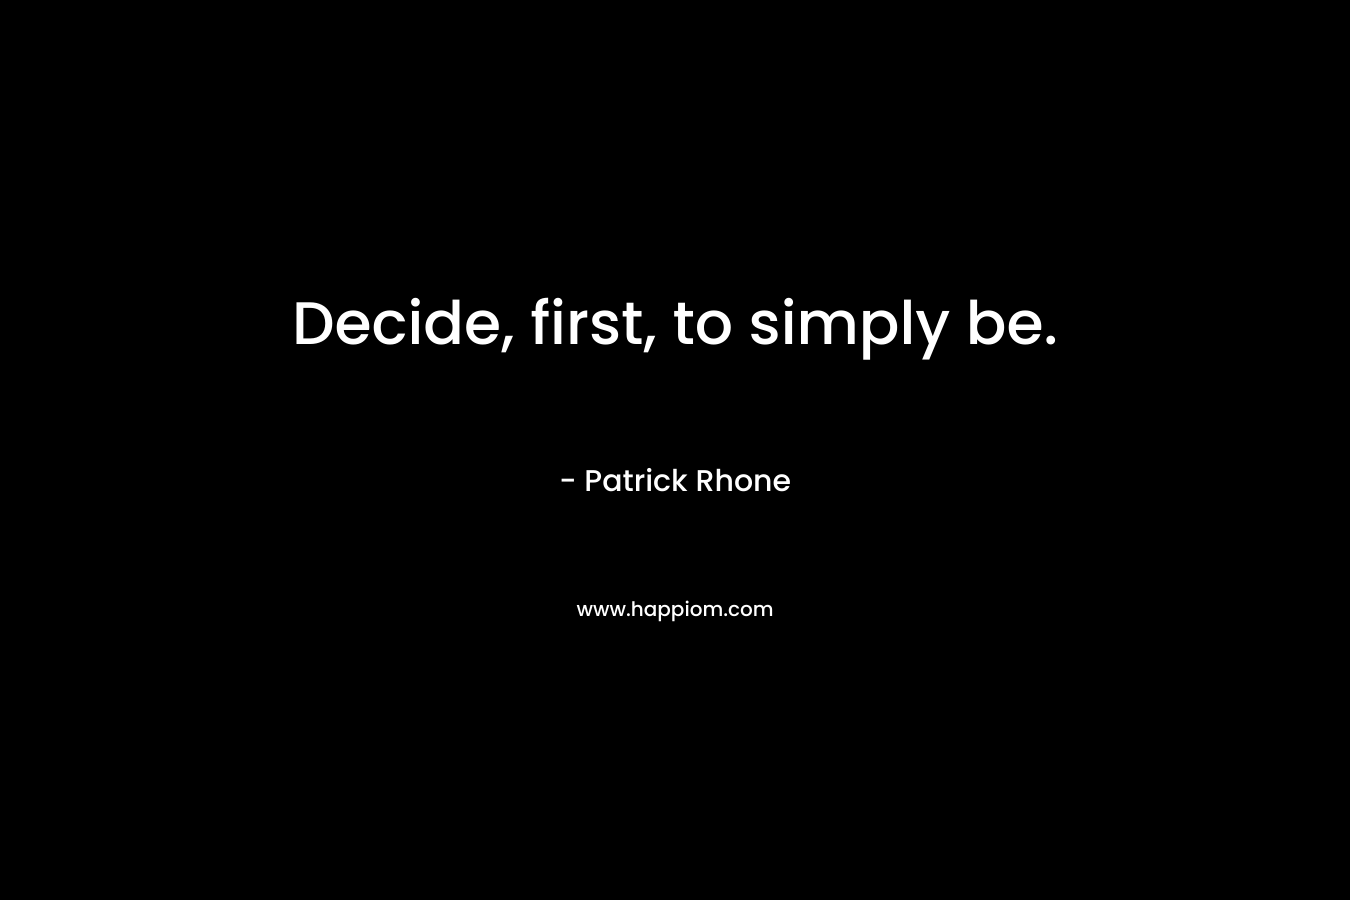 Decide, first, to simply be.